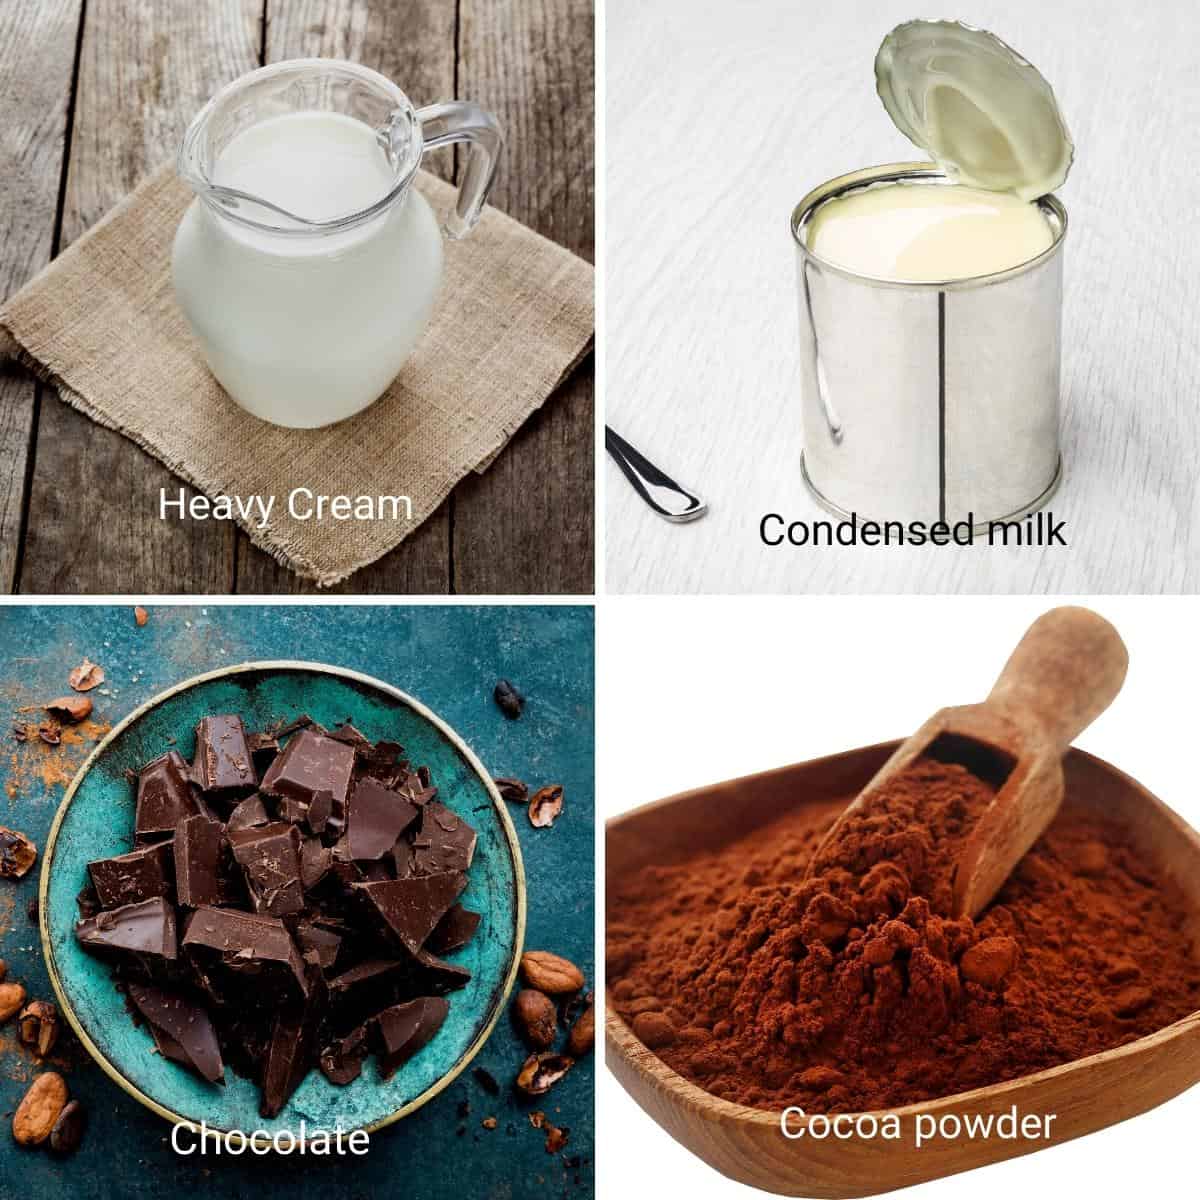 Ingredients for making chocolate ice cream.